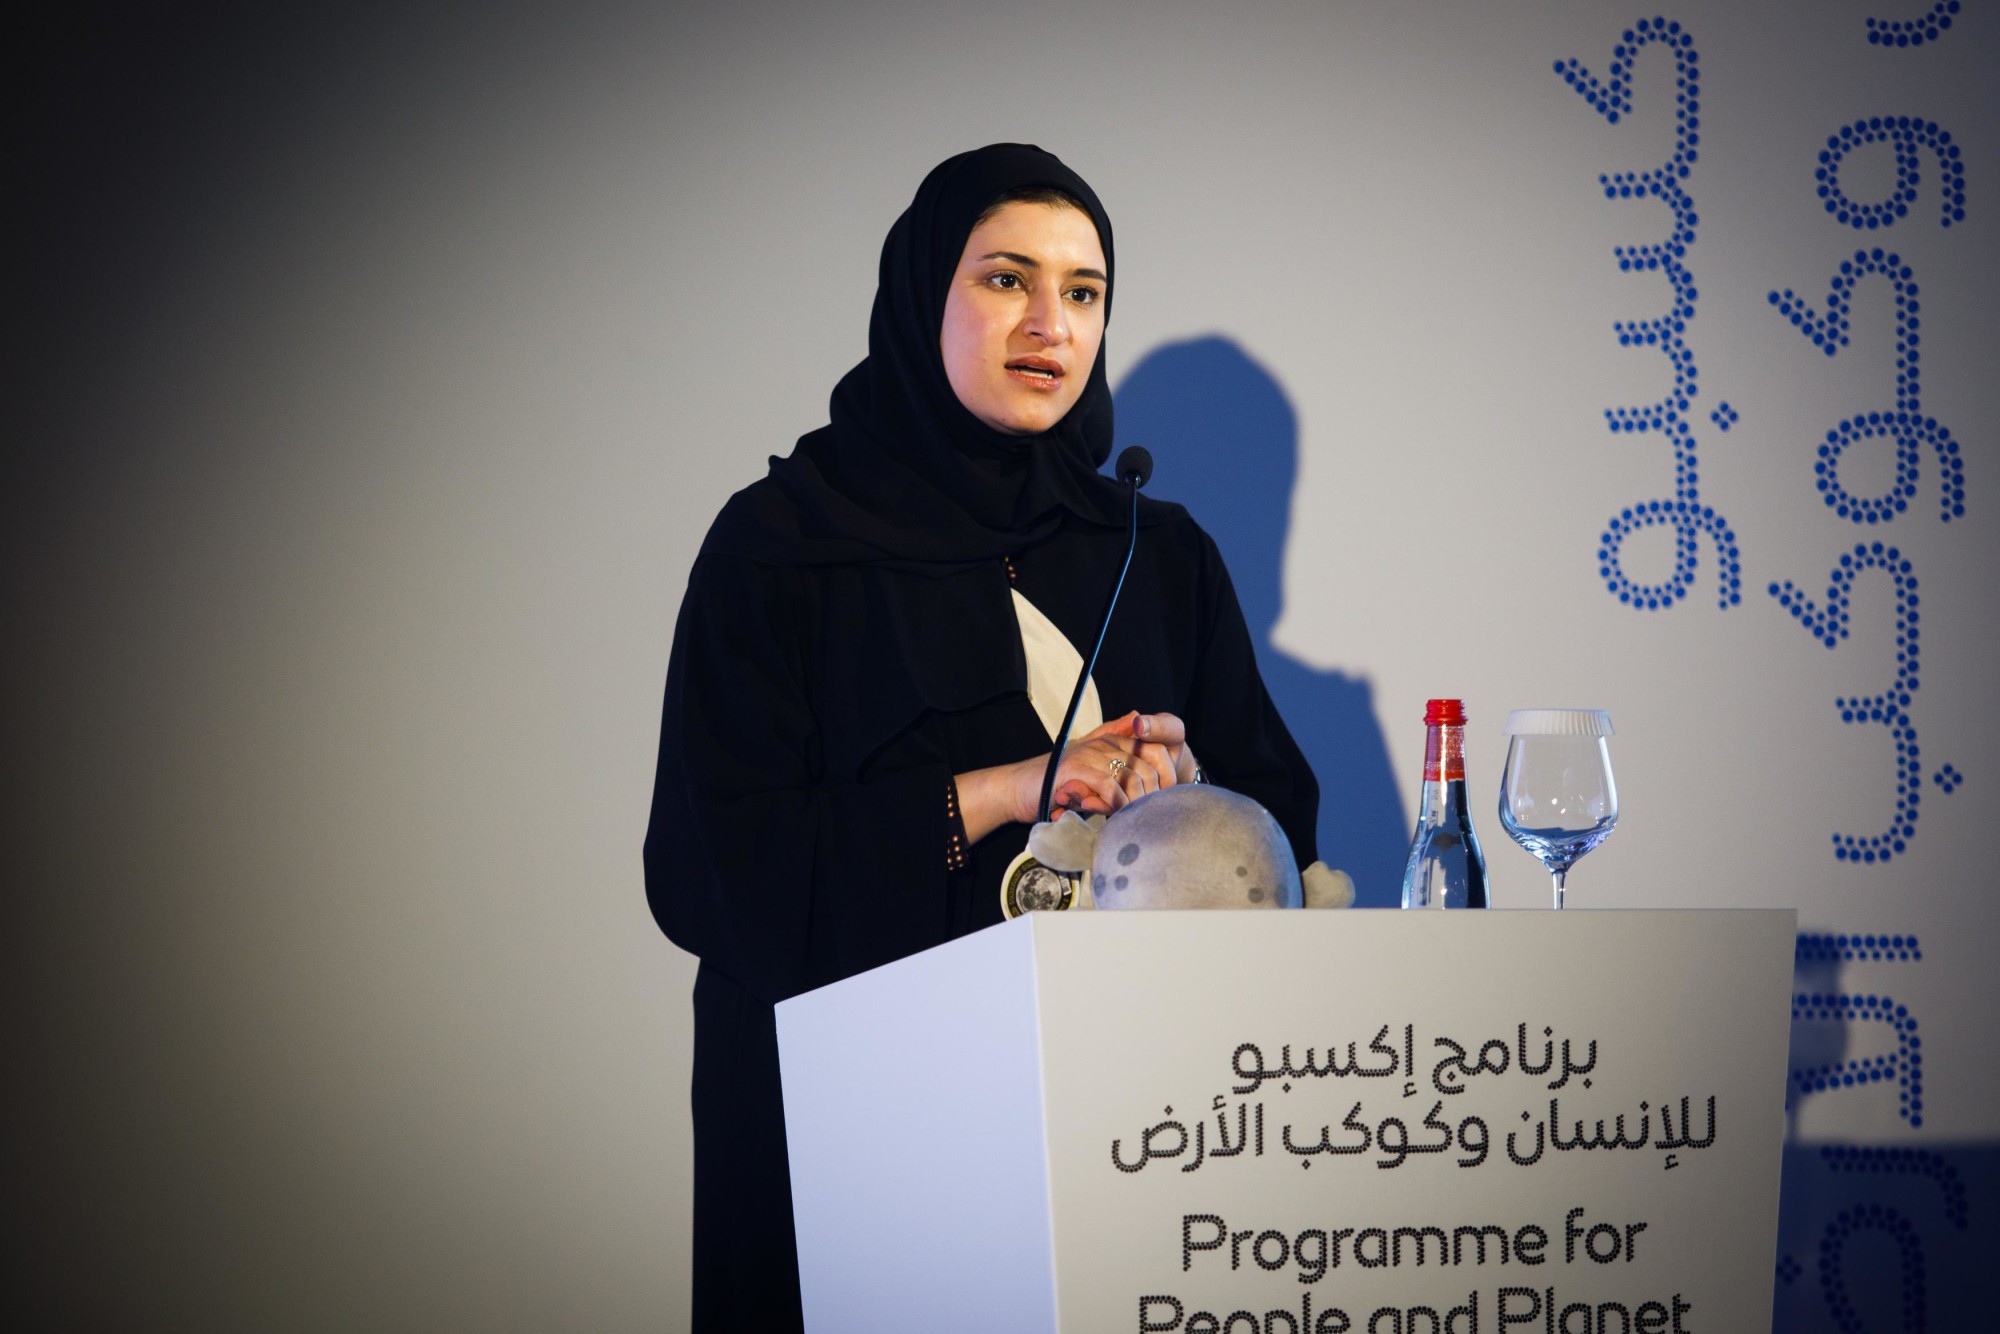 Her Excellency Sarah Al Amiri, UAE Minister of State for Advanced Technology, Ministry of Industry and Advanced Technology and Chairperson, UAE Space Agency talks during the International Day of Women and Girls in Science event at Nexus m469